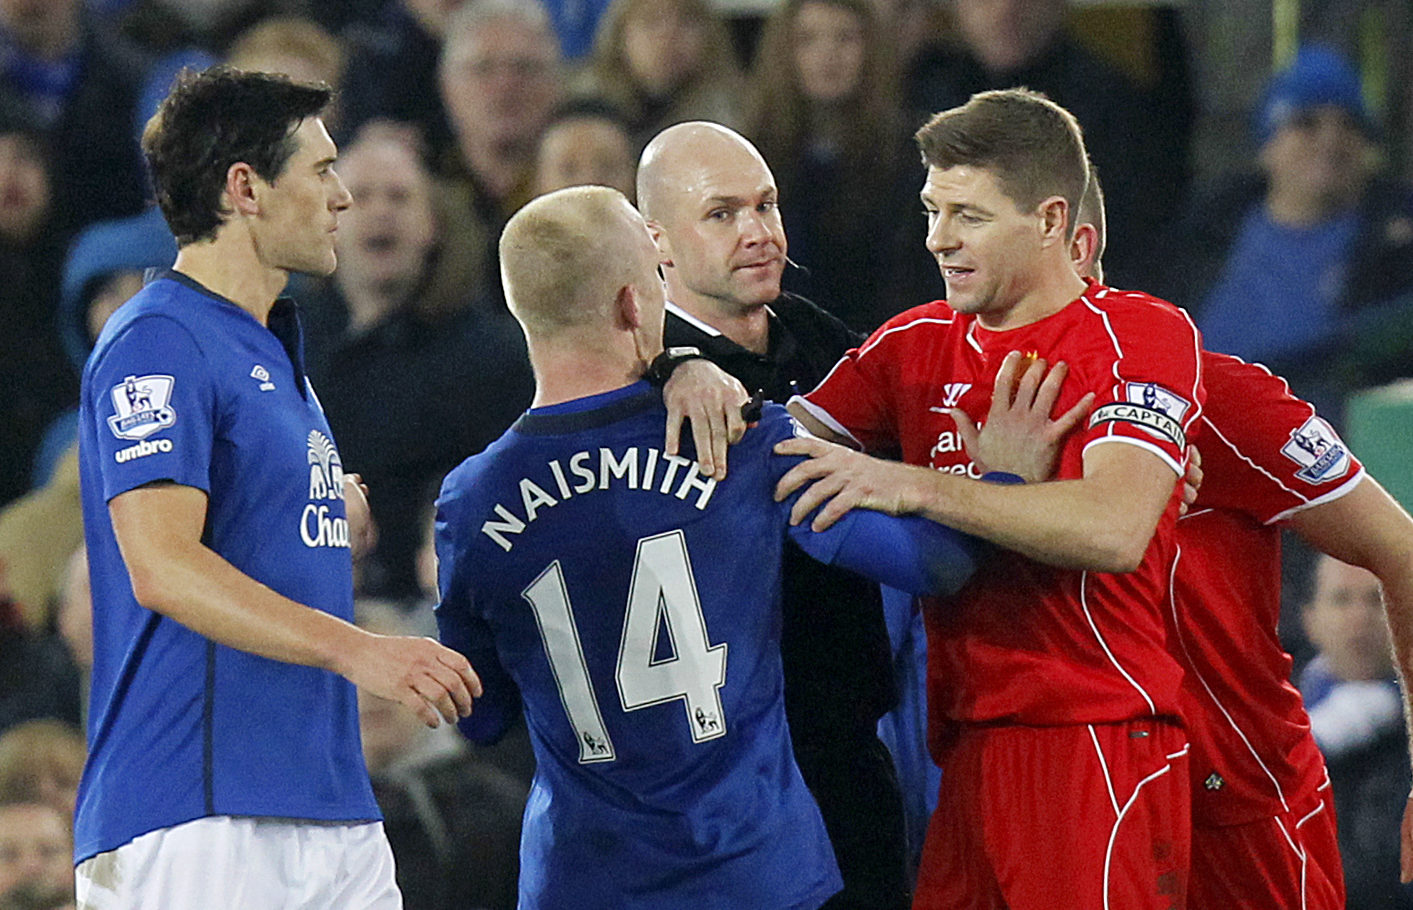 Steven Gerrard and Steven Naismith get acquainted during a Merseyside derby in 2015